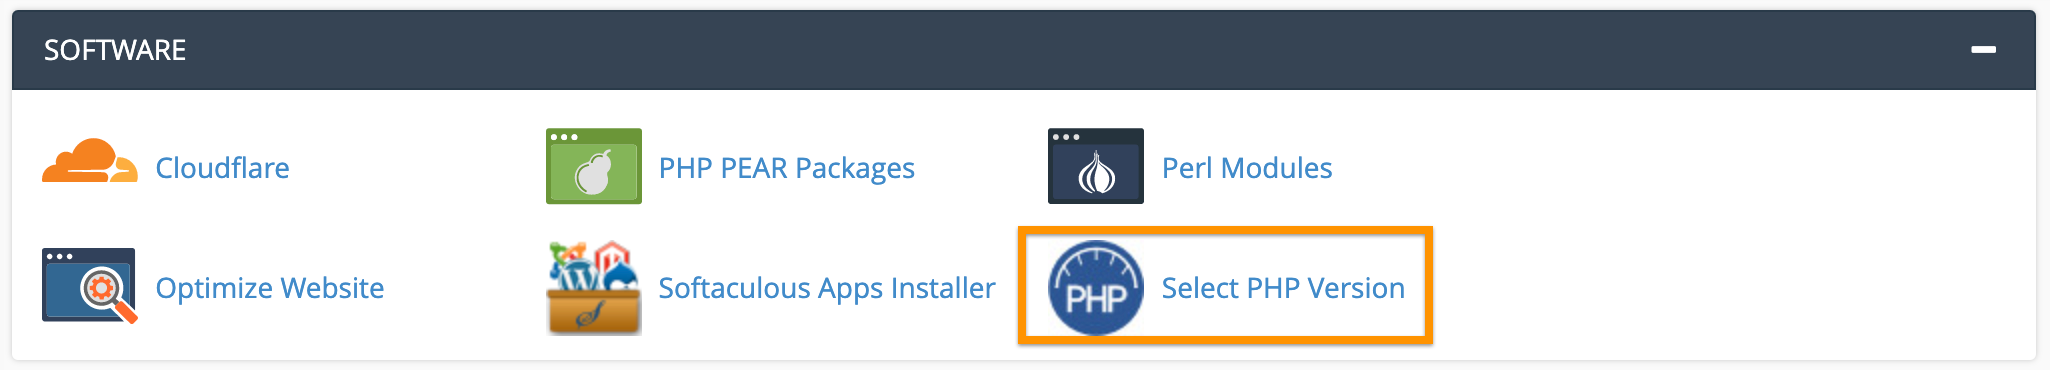 cPanel > Software > Select PHP Version